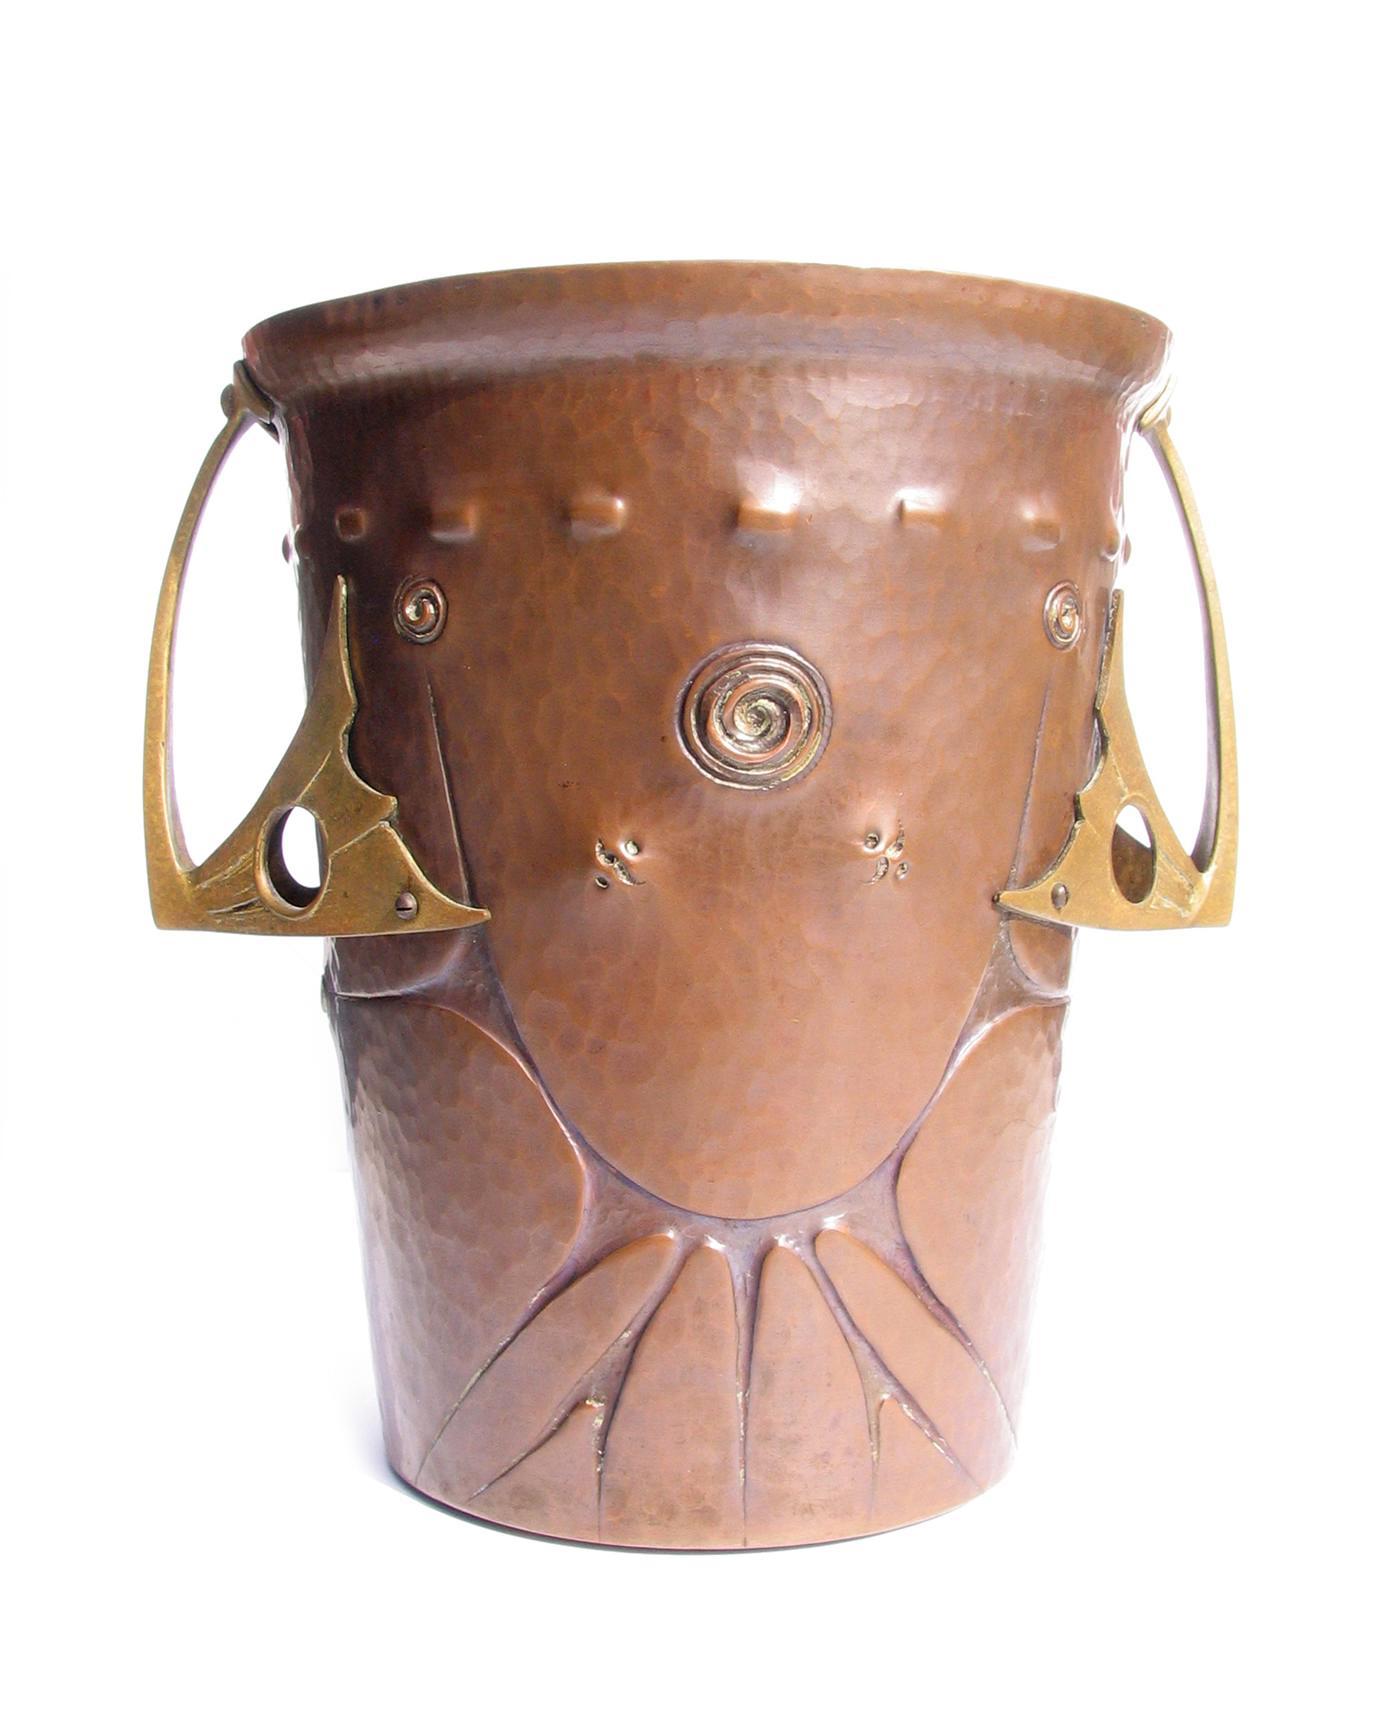 Ludwig Karl Maria Vierthaler repoussé copper bronze champagne bucket with cast bronze handles. Manufactured by Josef Winhart & Company, circa 1906.

Born in Munich in 1875, Ludwig Vierthaler's designs caught the eye of Tiffany & Company, New York,